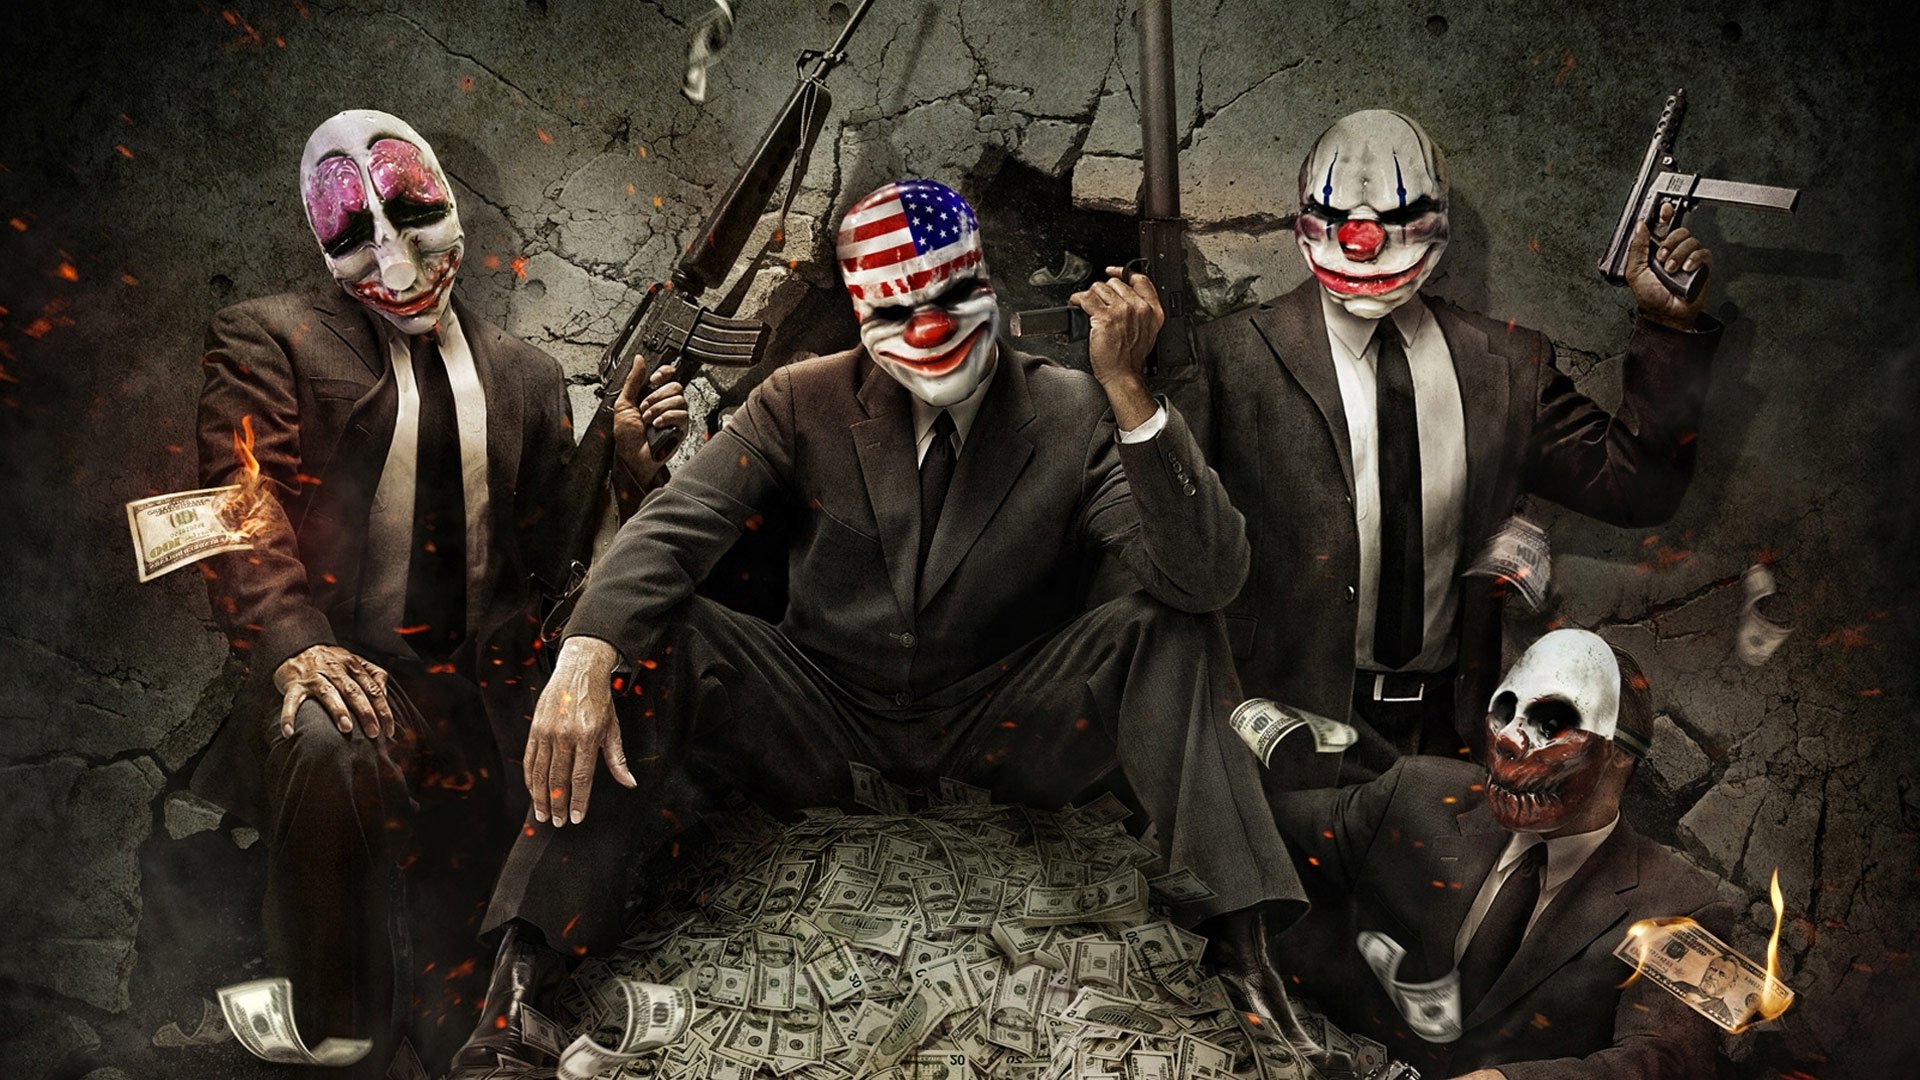 payday, Action, Co op, Shooter, Tactical, Stealth, Crime Wallpaper